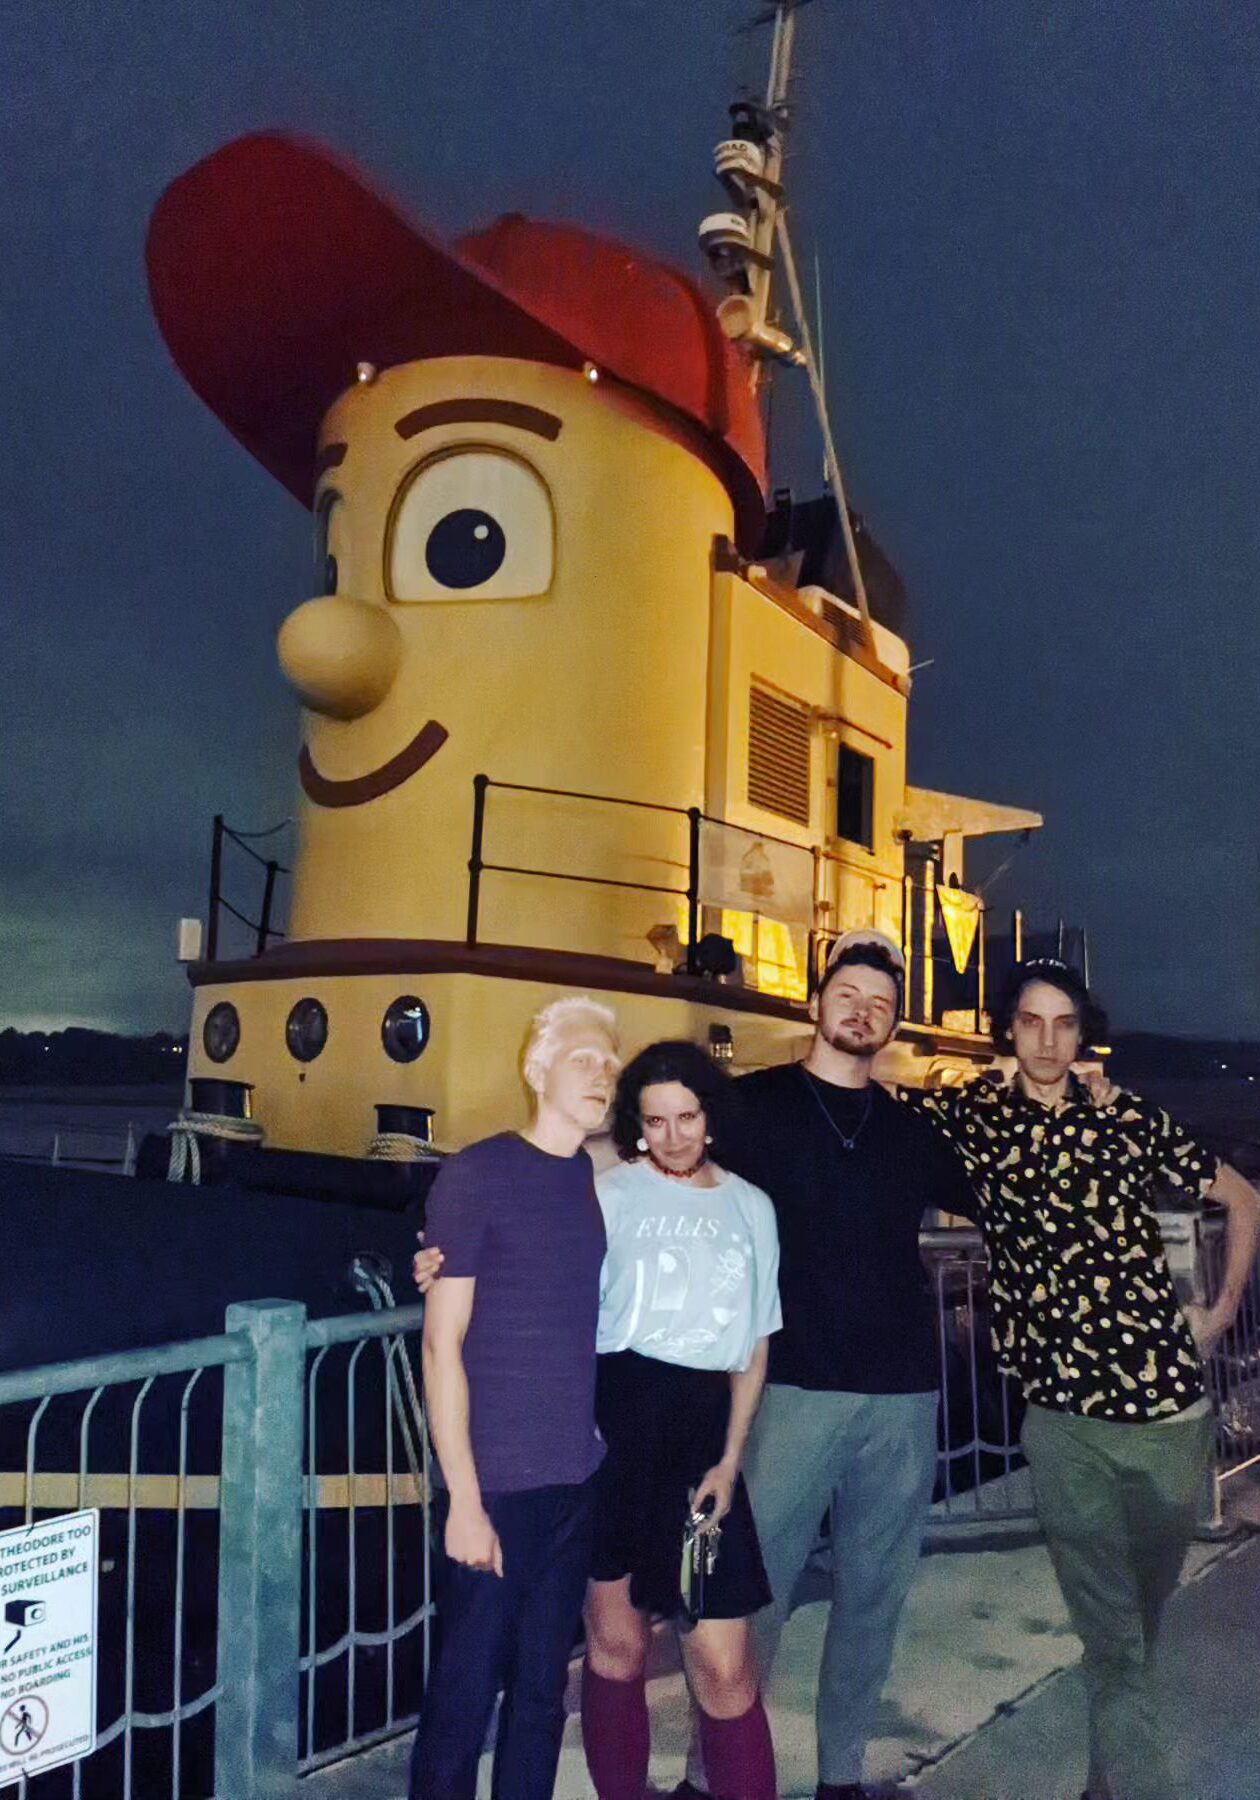 Junestone band members standing in front of a tugboat